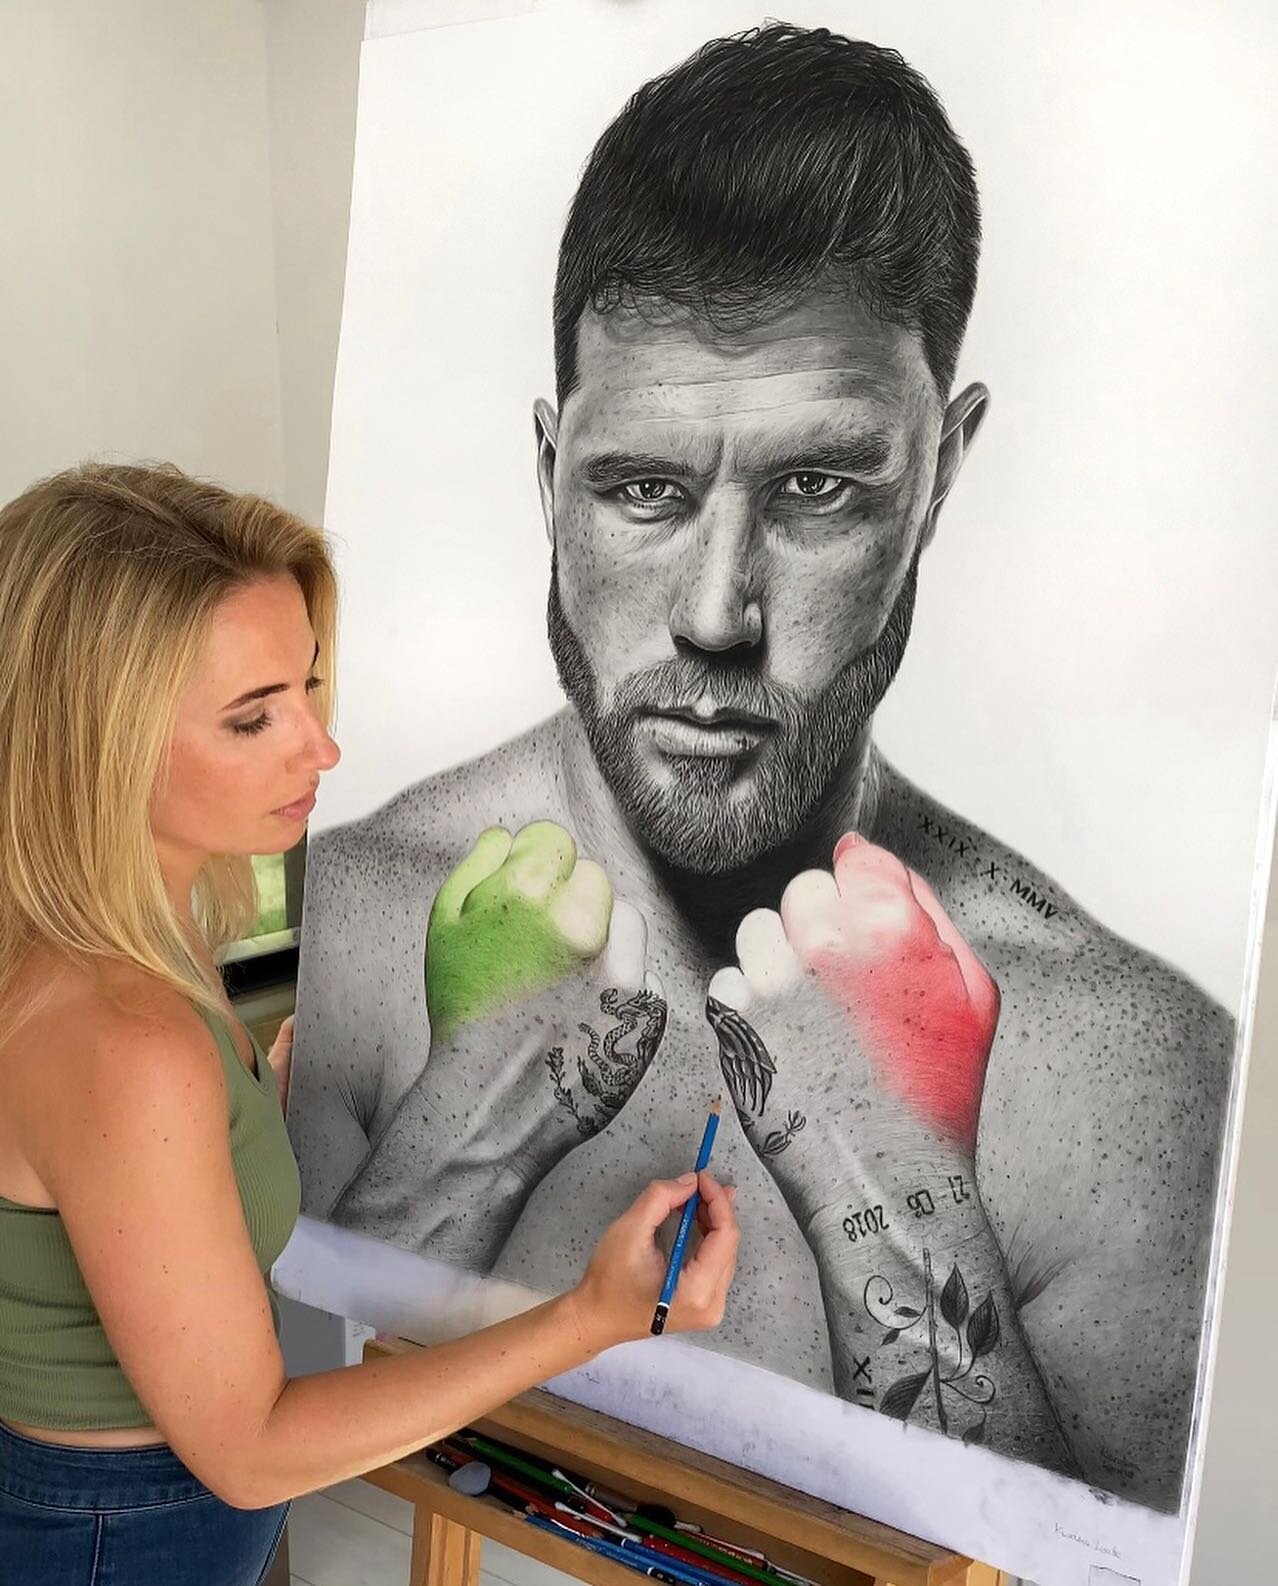 Good luck tonight Champ! 🥊🇲🇽 
Are you team @canelo or team @twincharlo ? 
&bull;
See my original artwork at @artunified gallery.